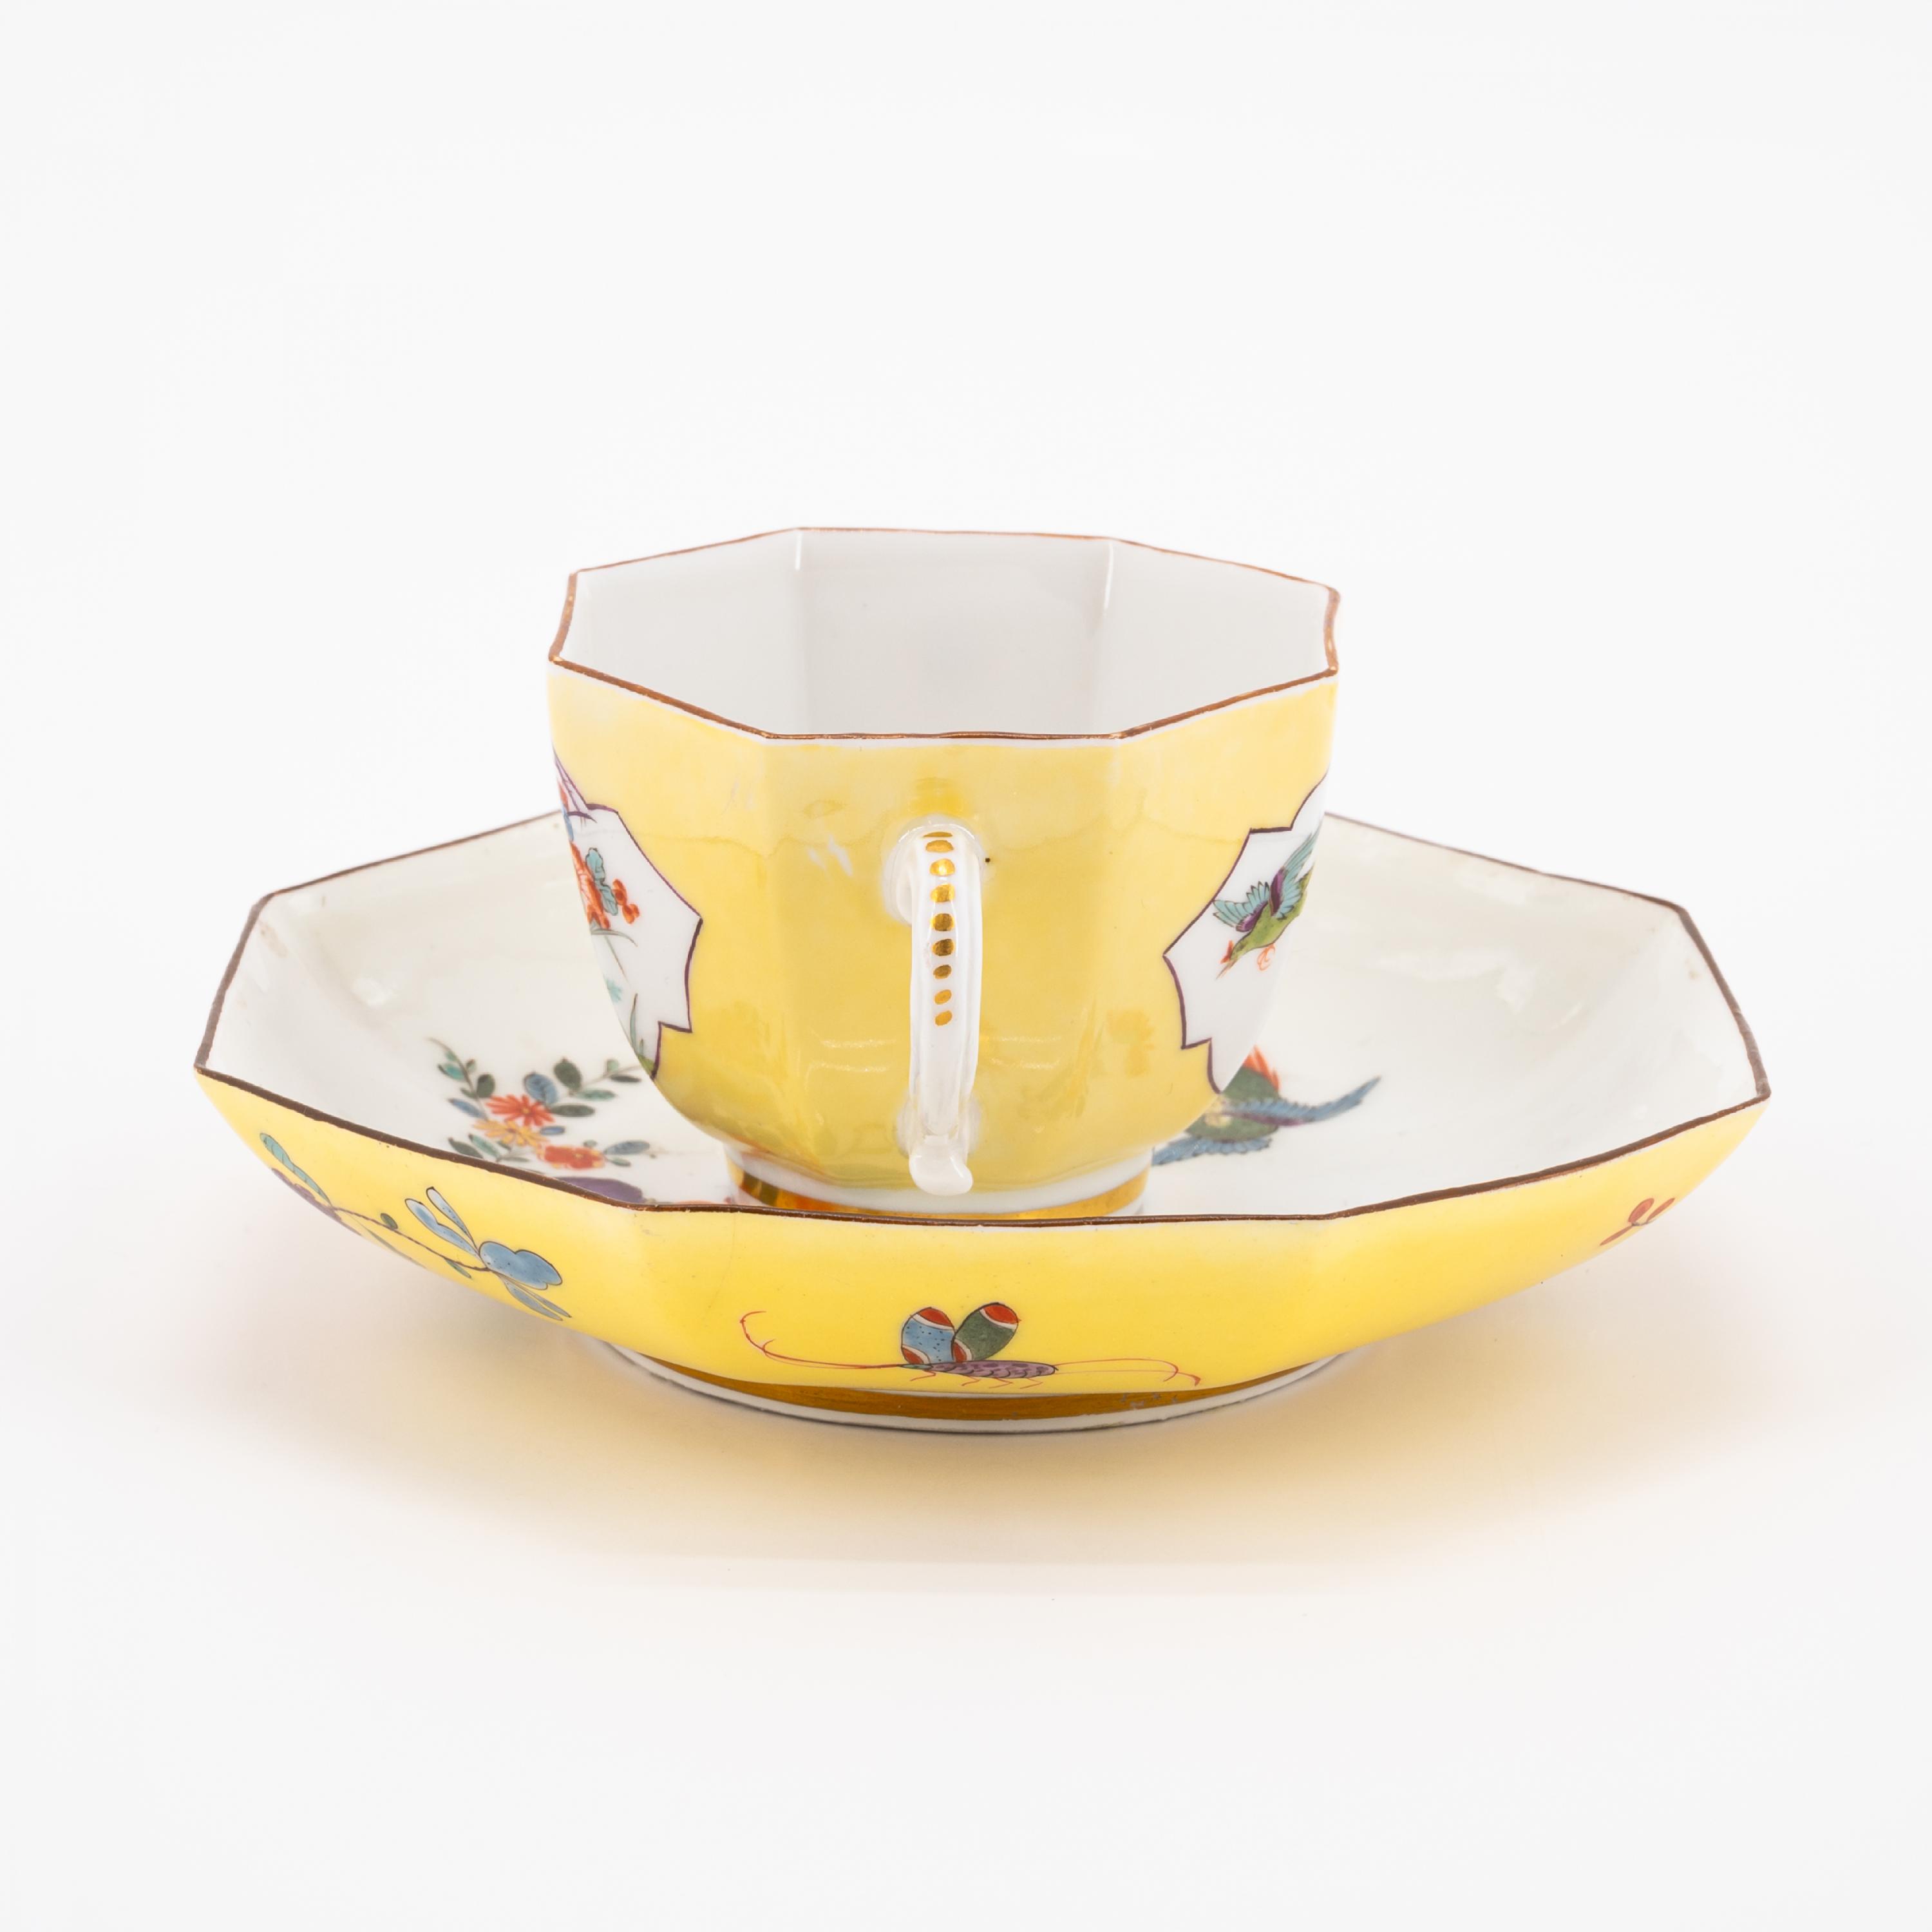 TWO PORCELAIN CUP WITH DOUBLE HANDLES & SAUCERS WITH KAKIEMON DECOR AND YELLOW GROUND - Image 2 of 11